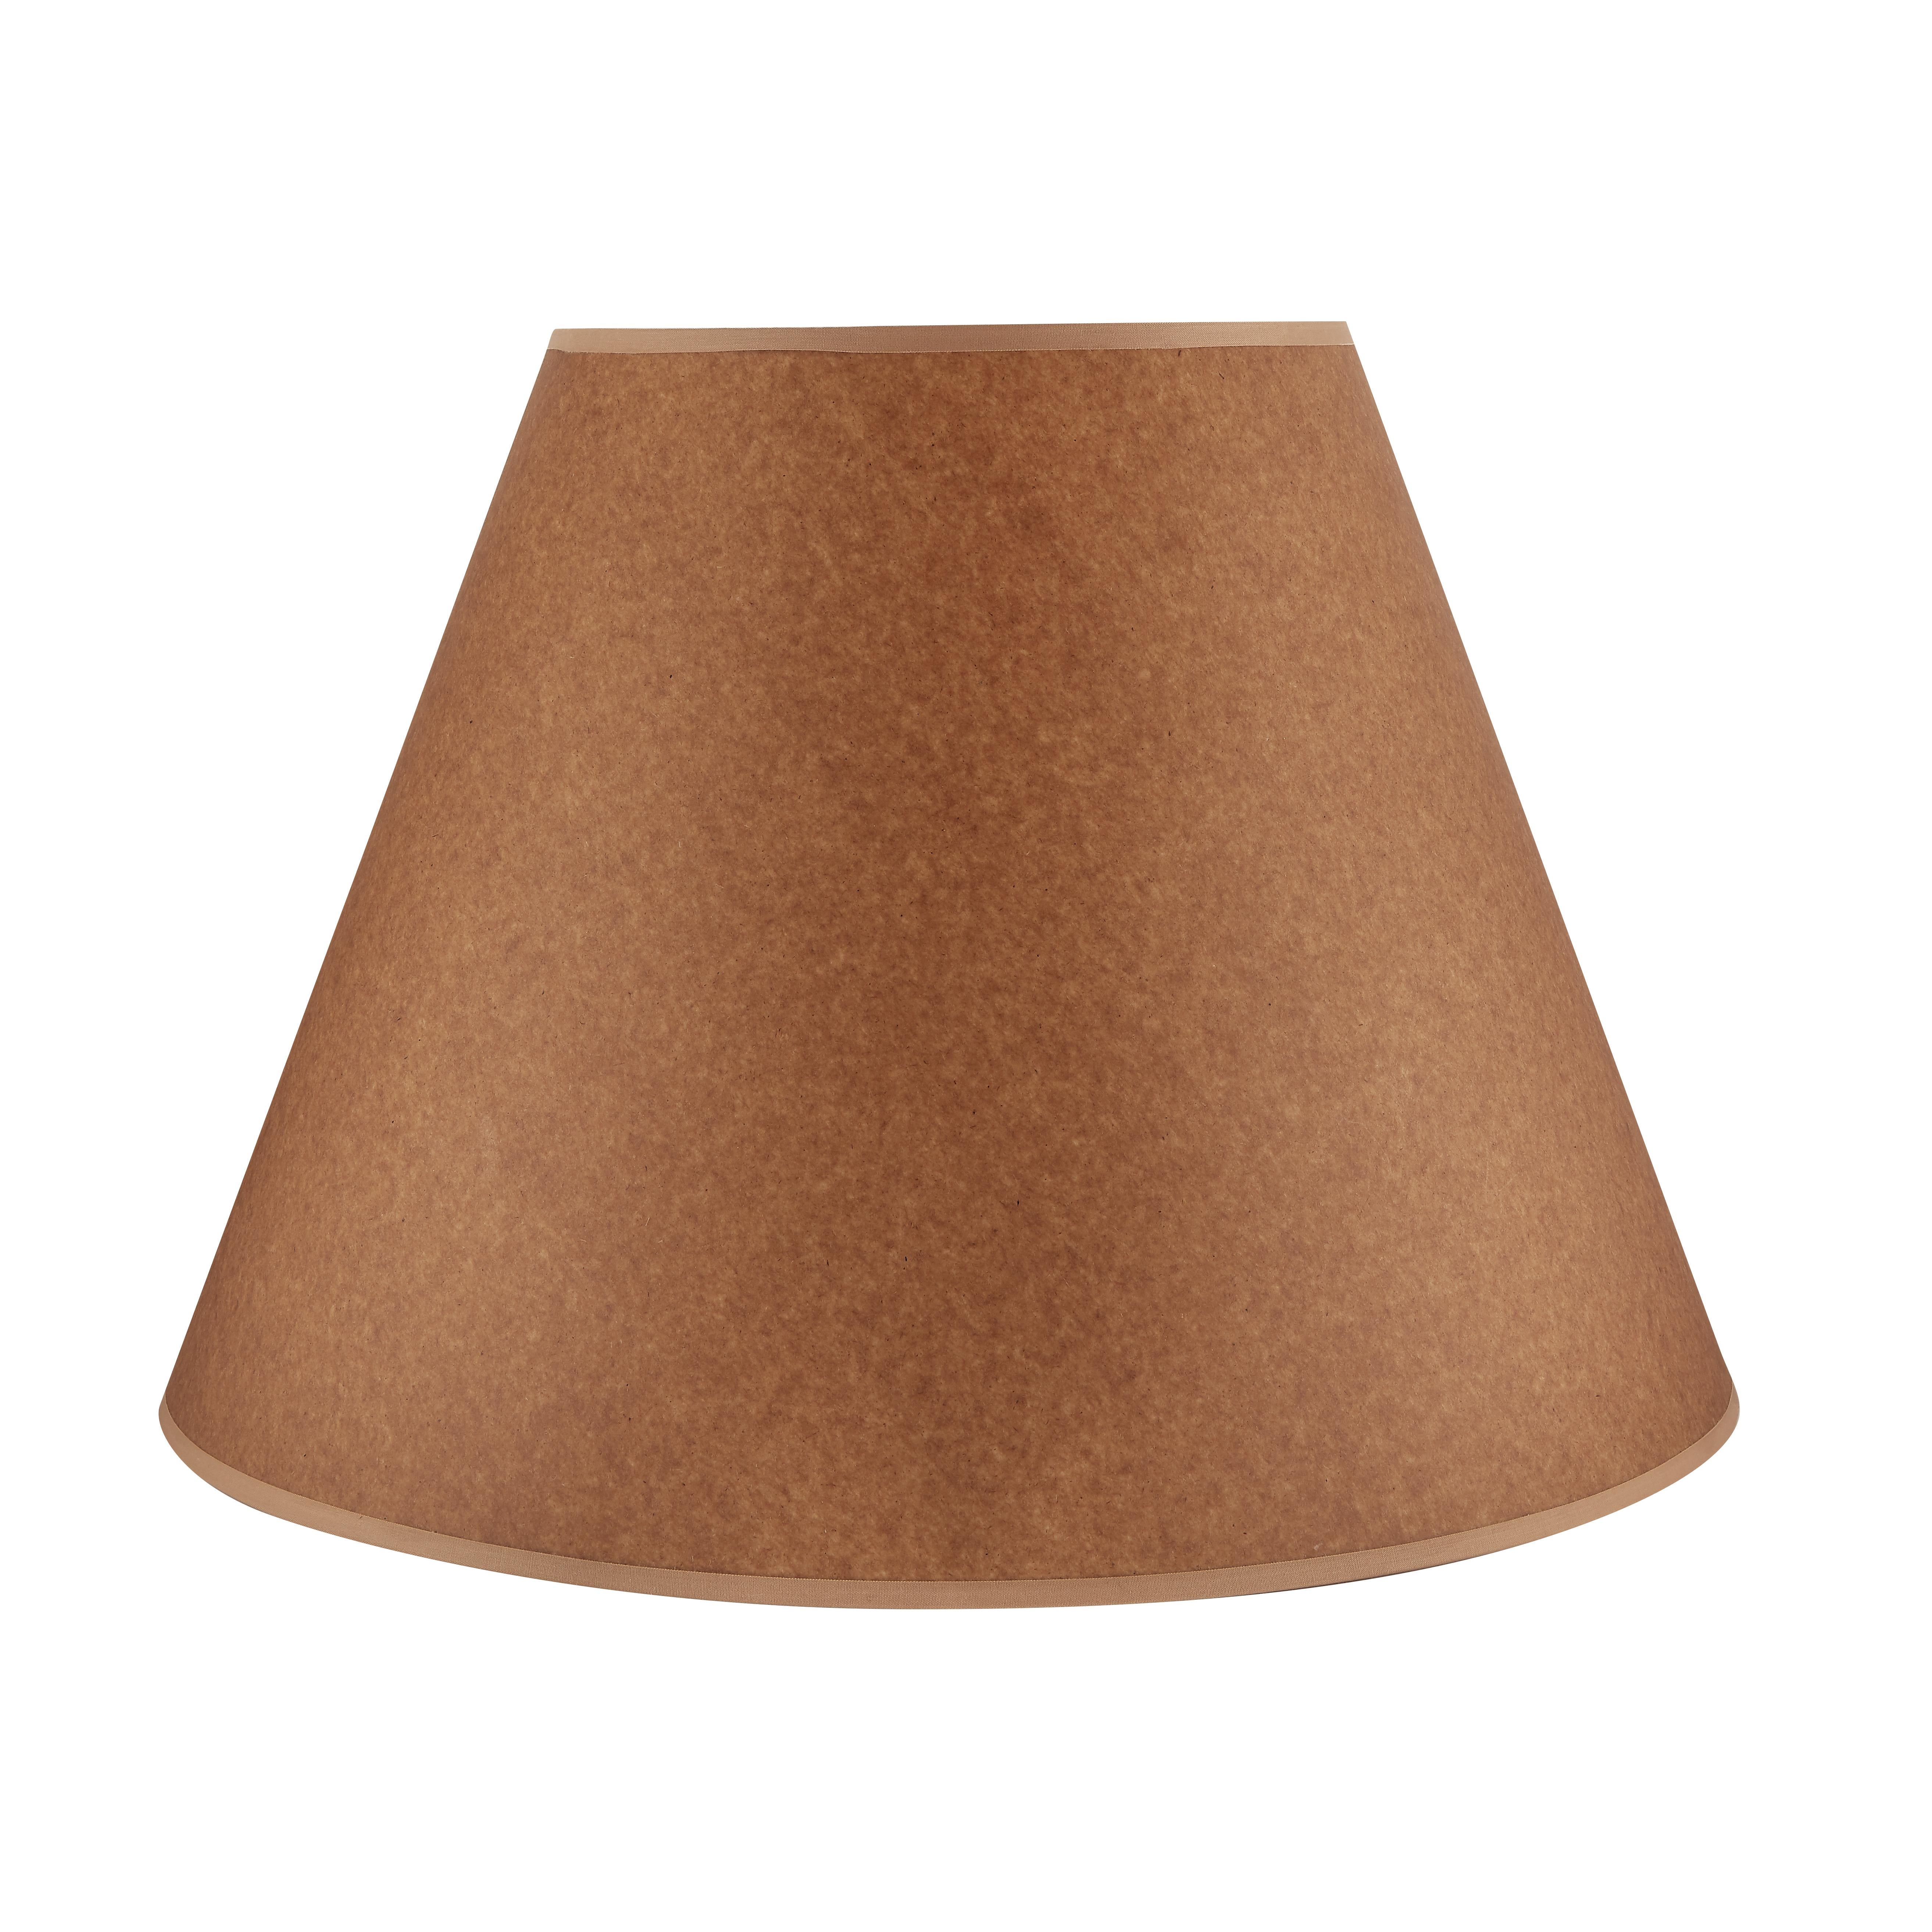 Brown paper lampshades add an undeniable warmth and charm to a space, creating a welcoming glow.